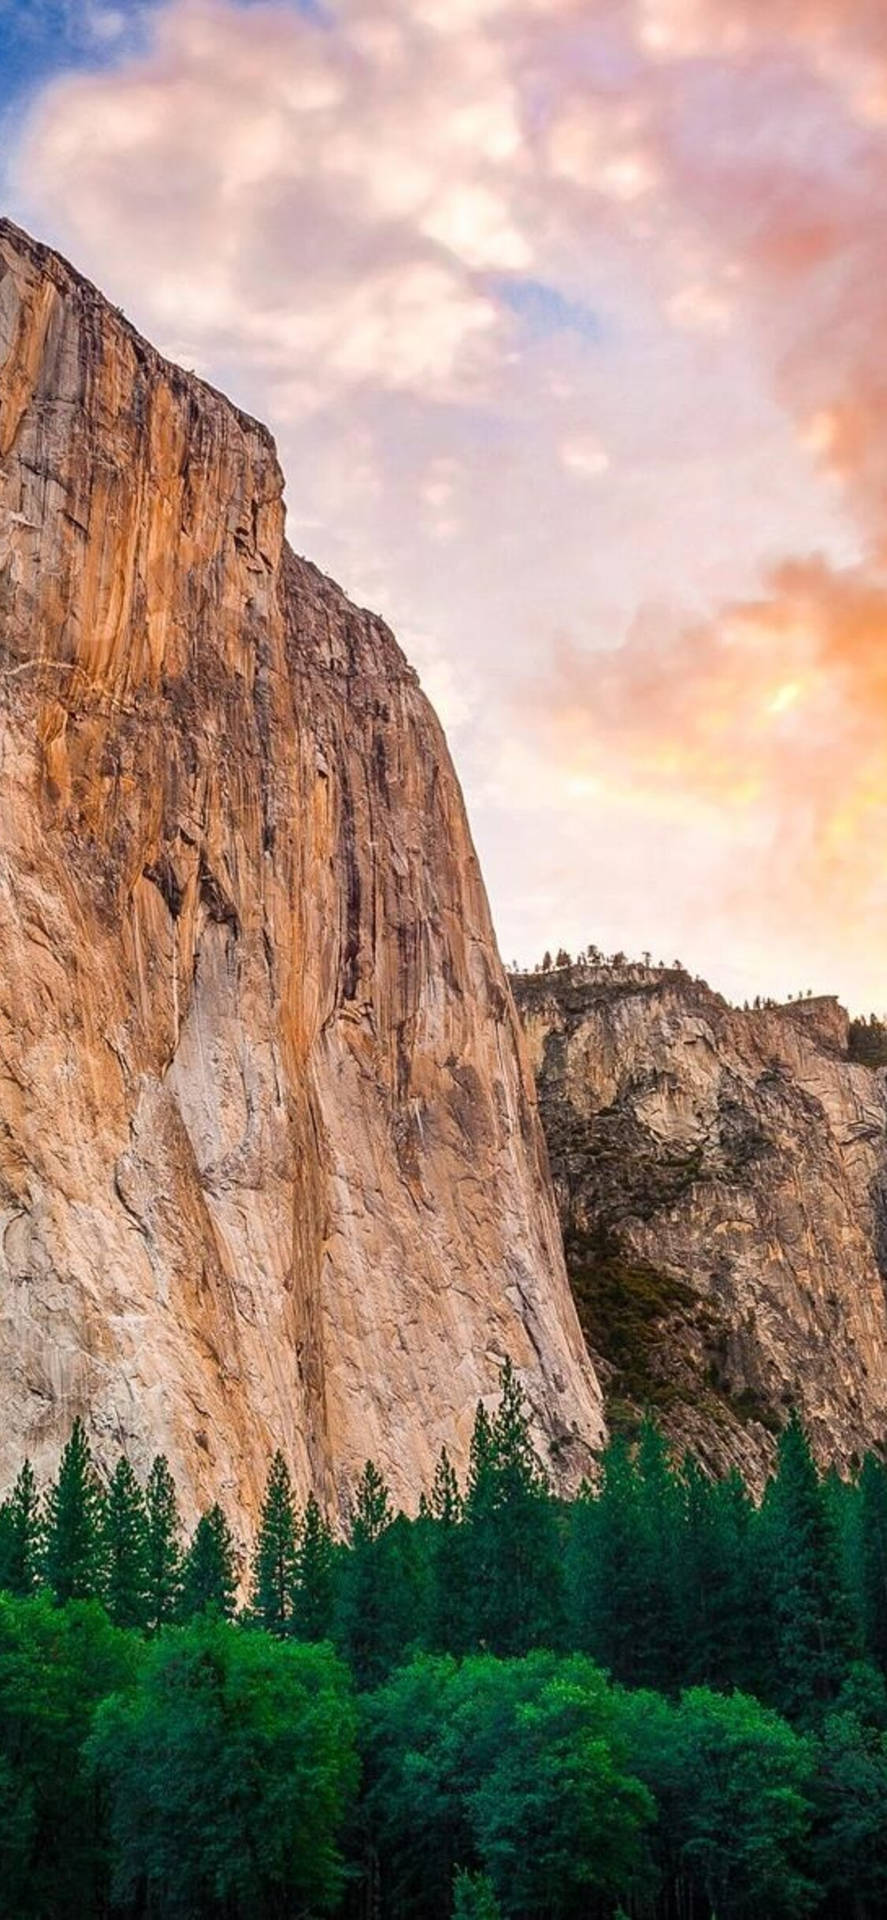 Explore the Beauty of Yosemite National Park with your Iphone Wallpaper